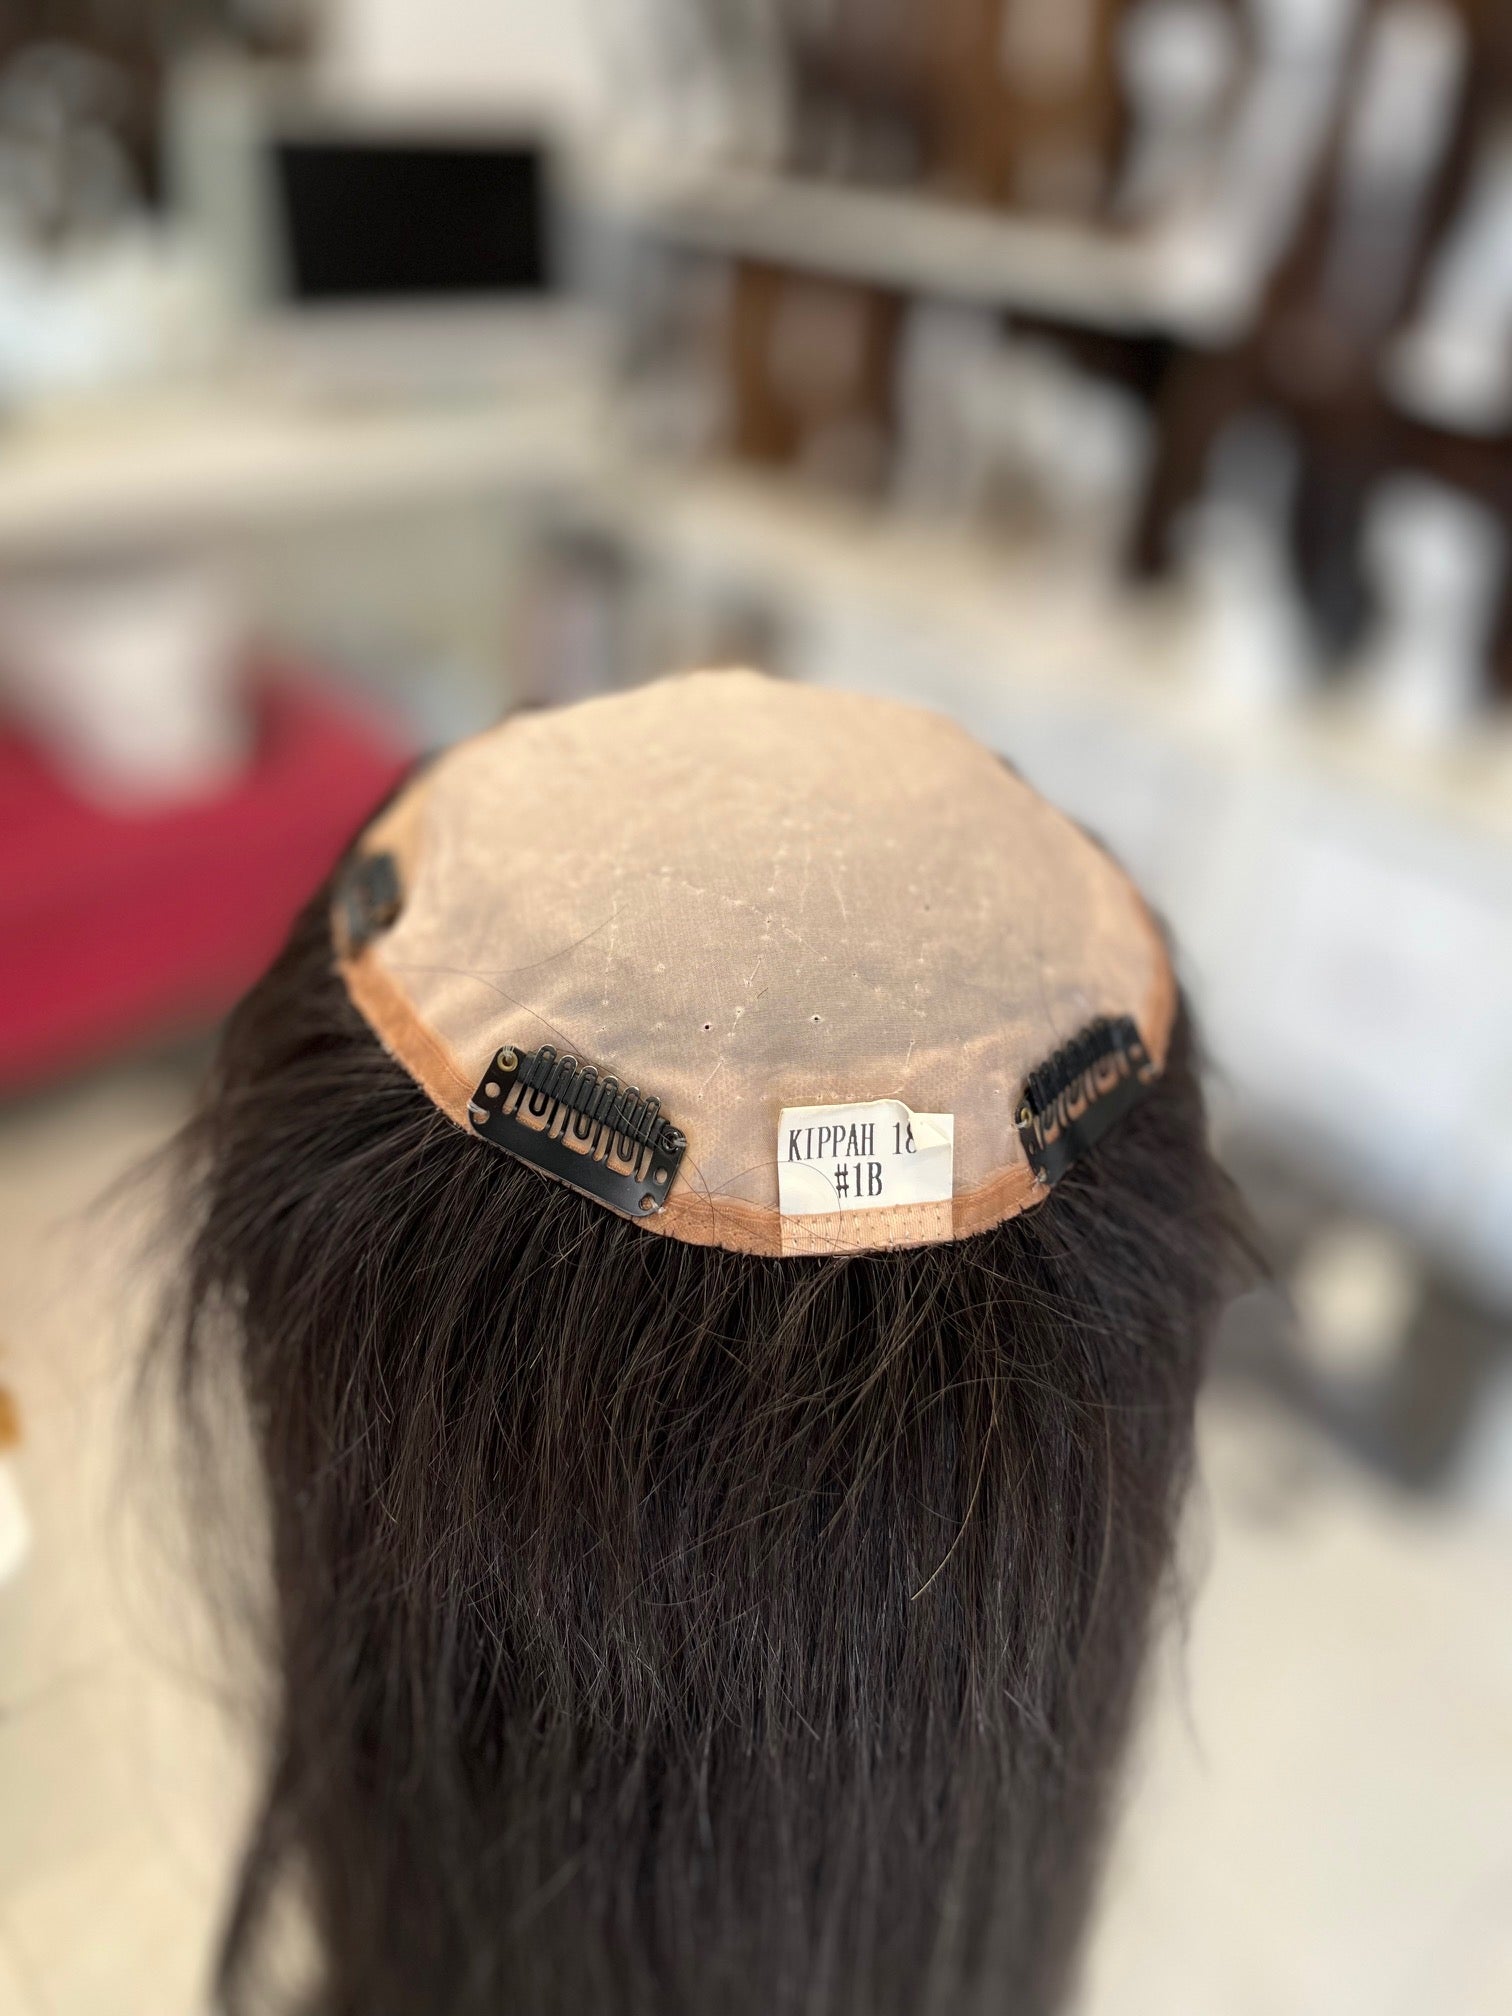 French Top Kippa Topper (Consignment)